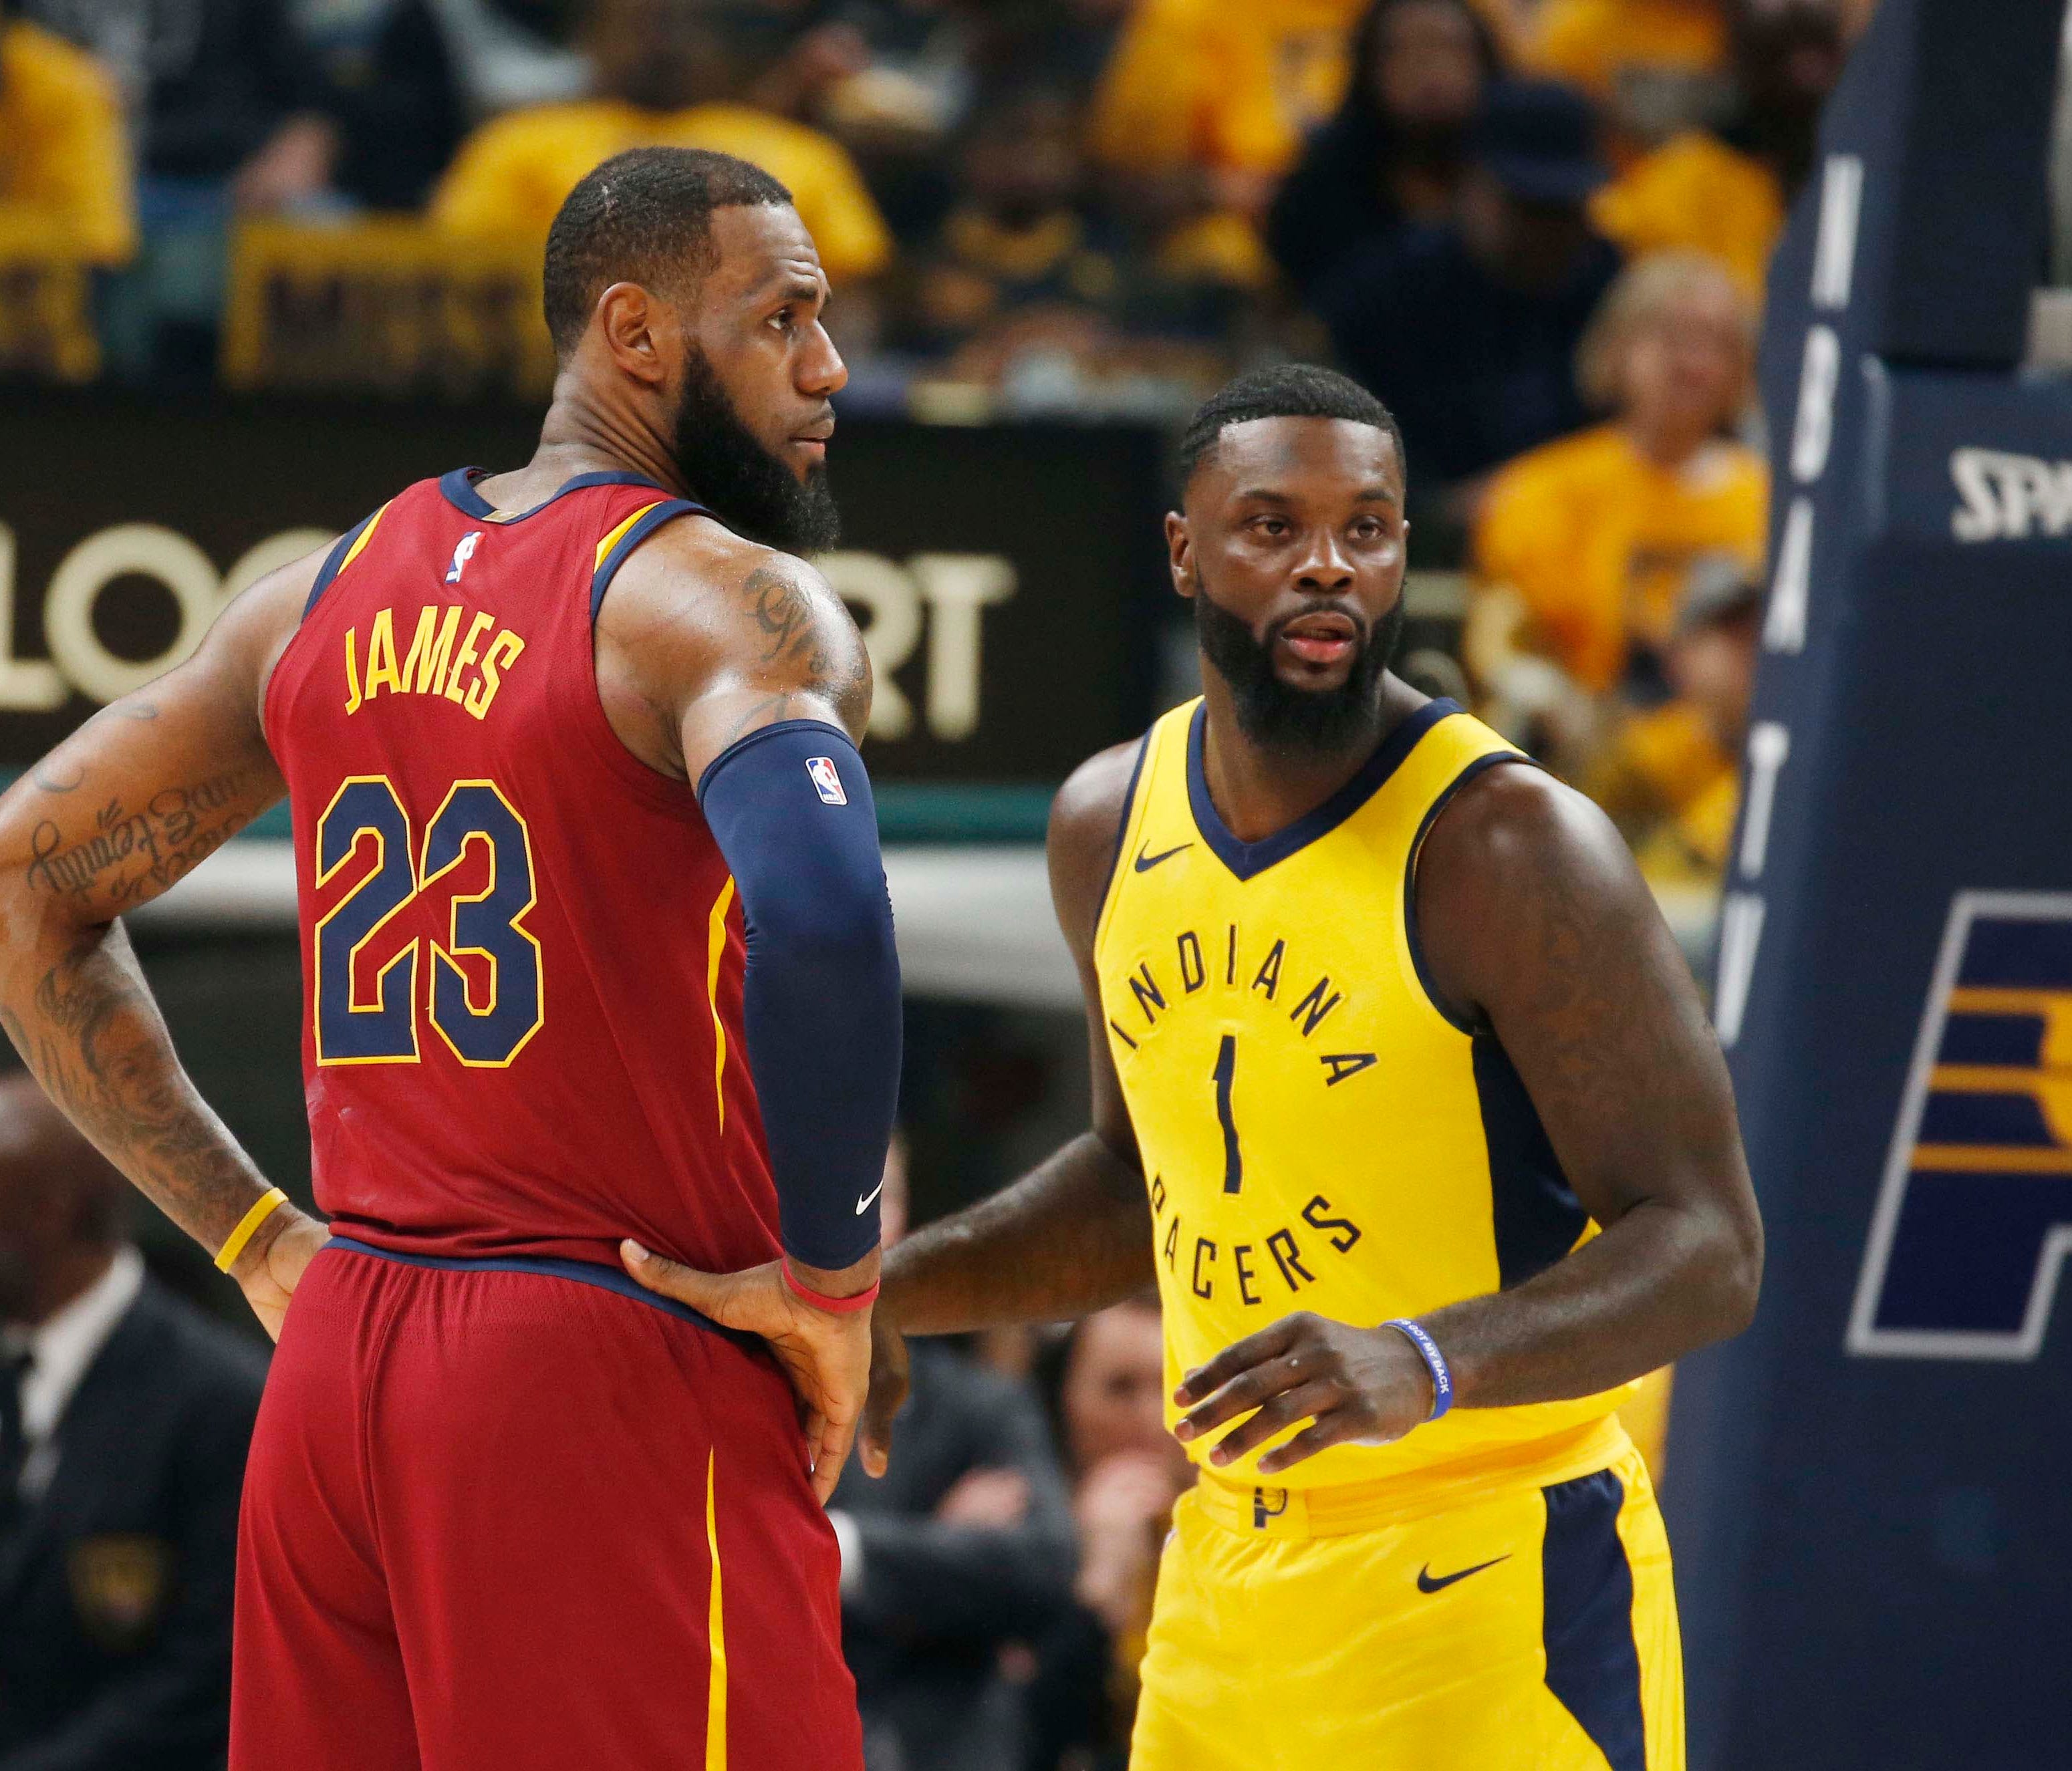 Cleveland Cavaliers forward LeBron James (23) is guarded by Indiana Pacers guard Lance Stephenson (1) during the first quarter in game three of the first round of the 2018 NBA Playoffs at Bankers Life Fieldhouse.